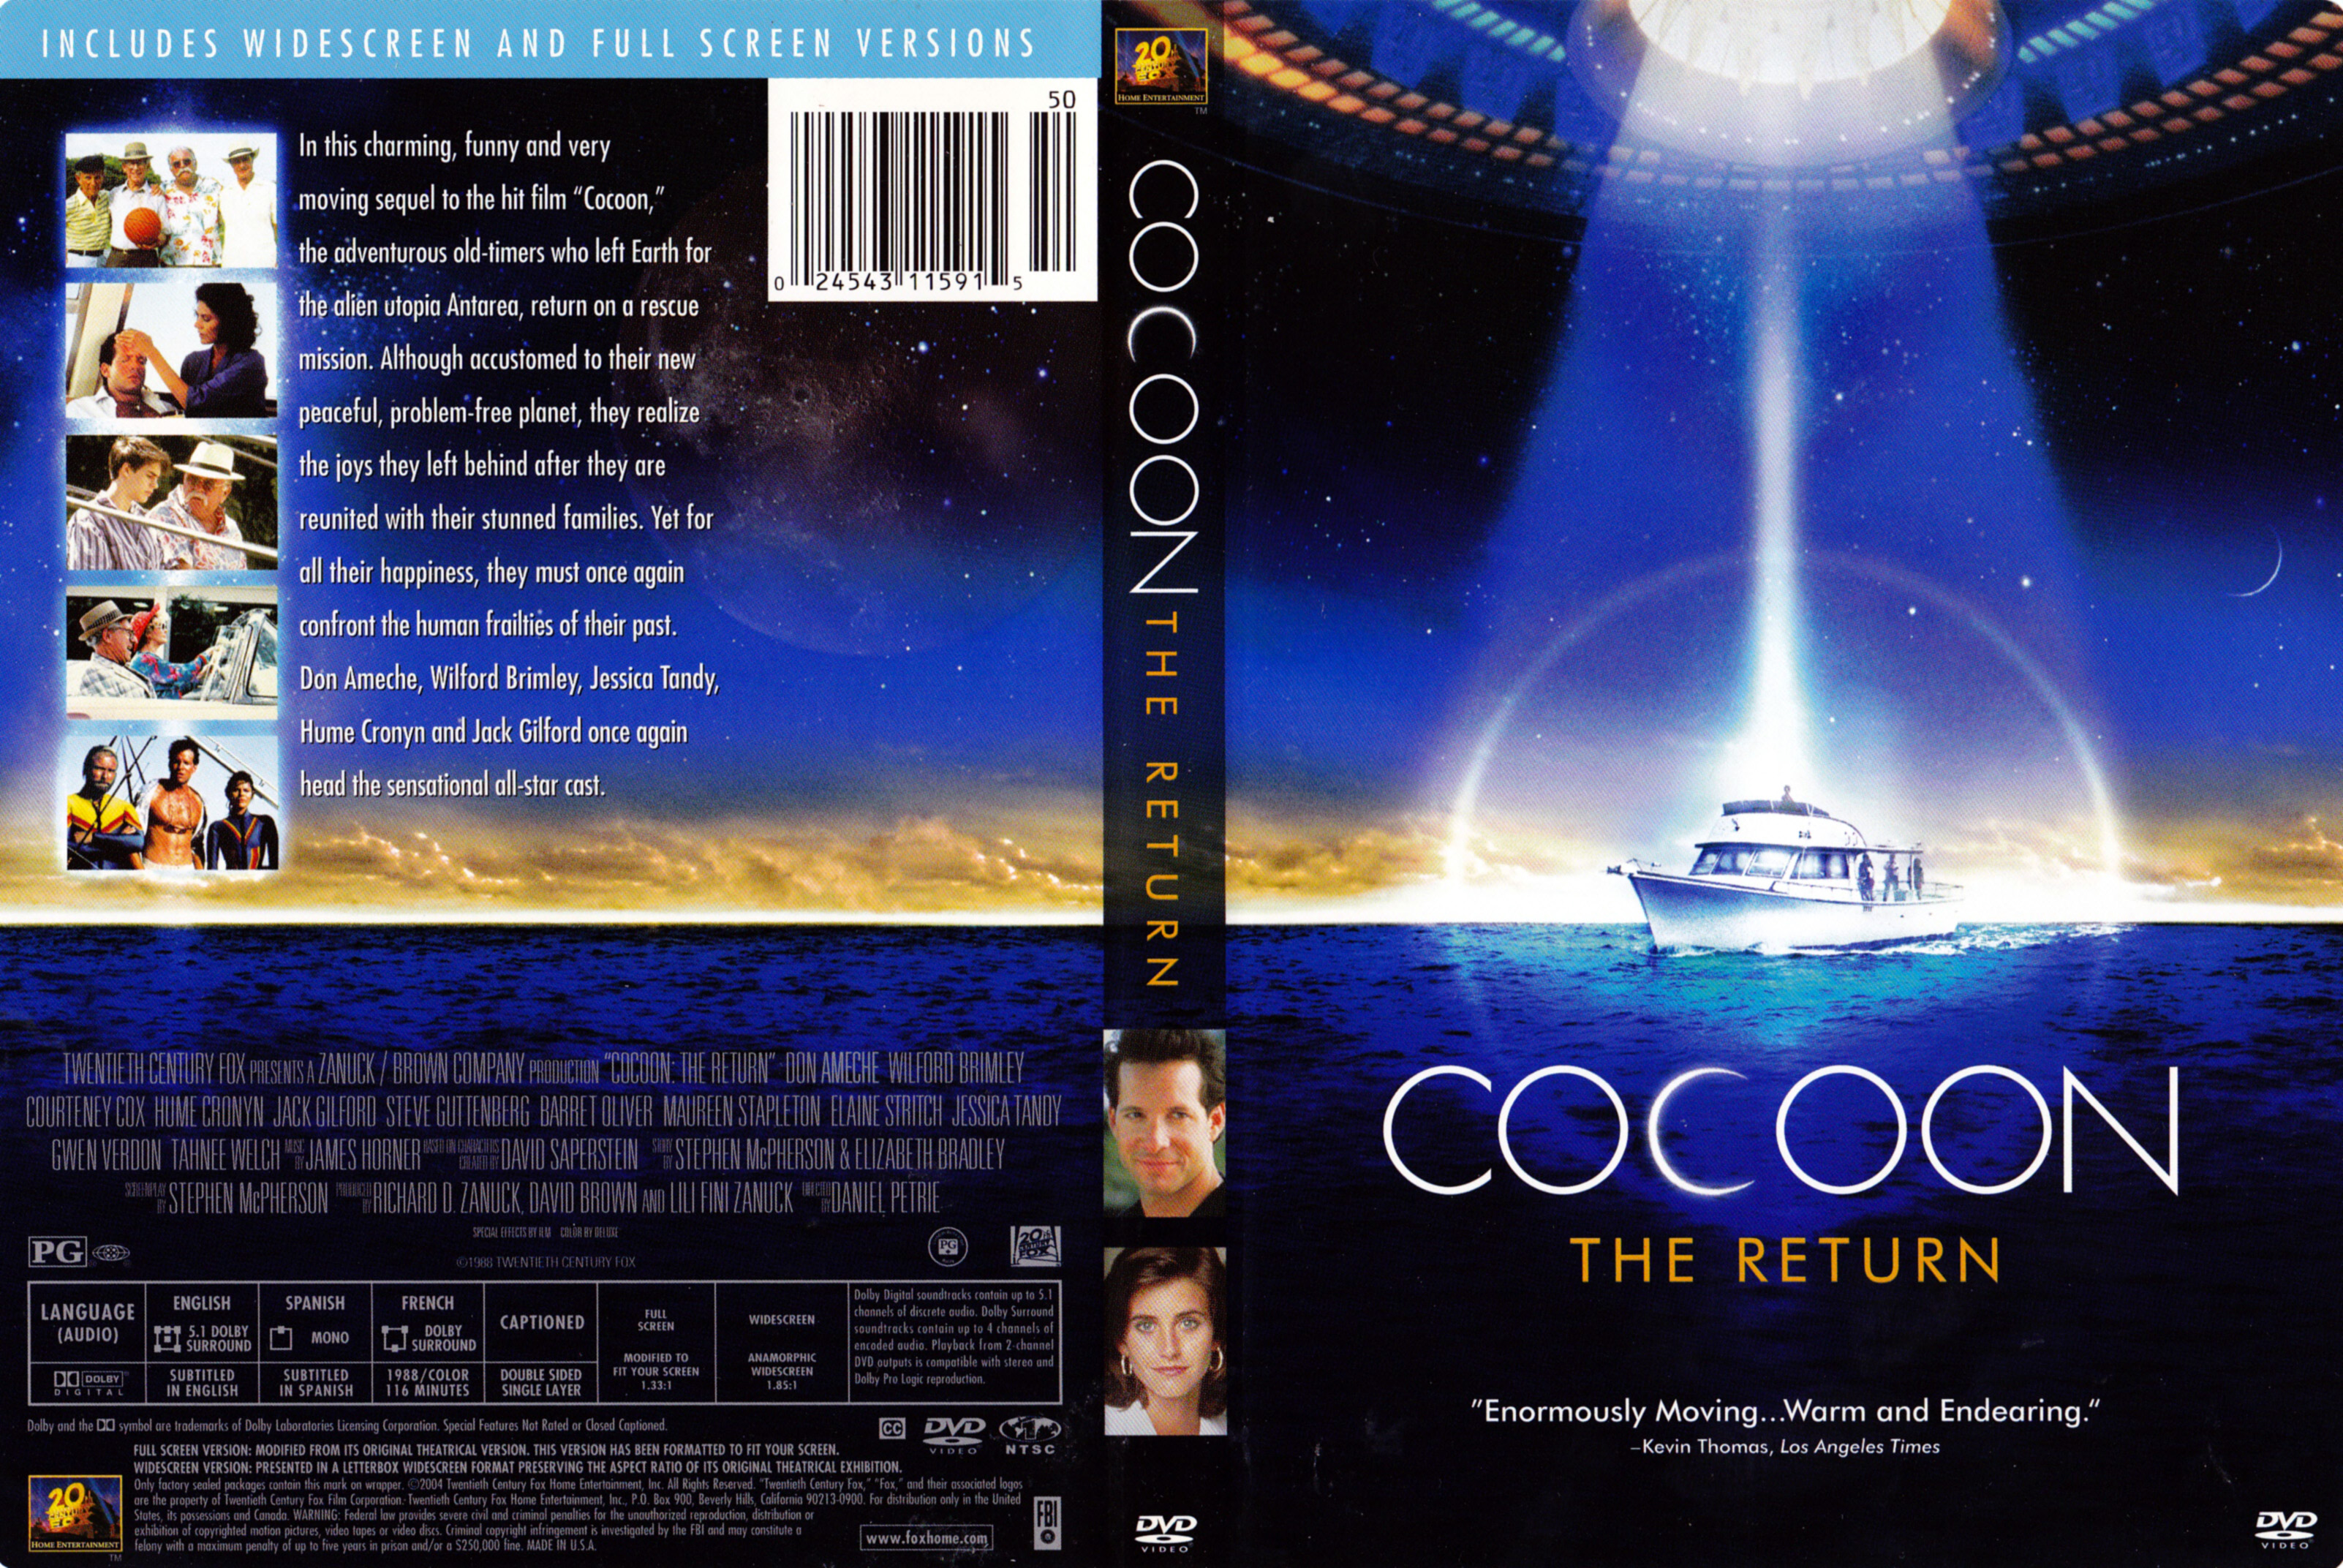 Jaquette DVD Cocoon The return (Canadienne)